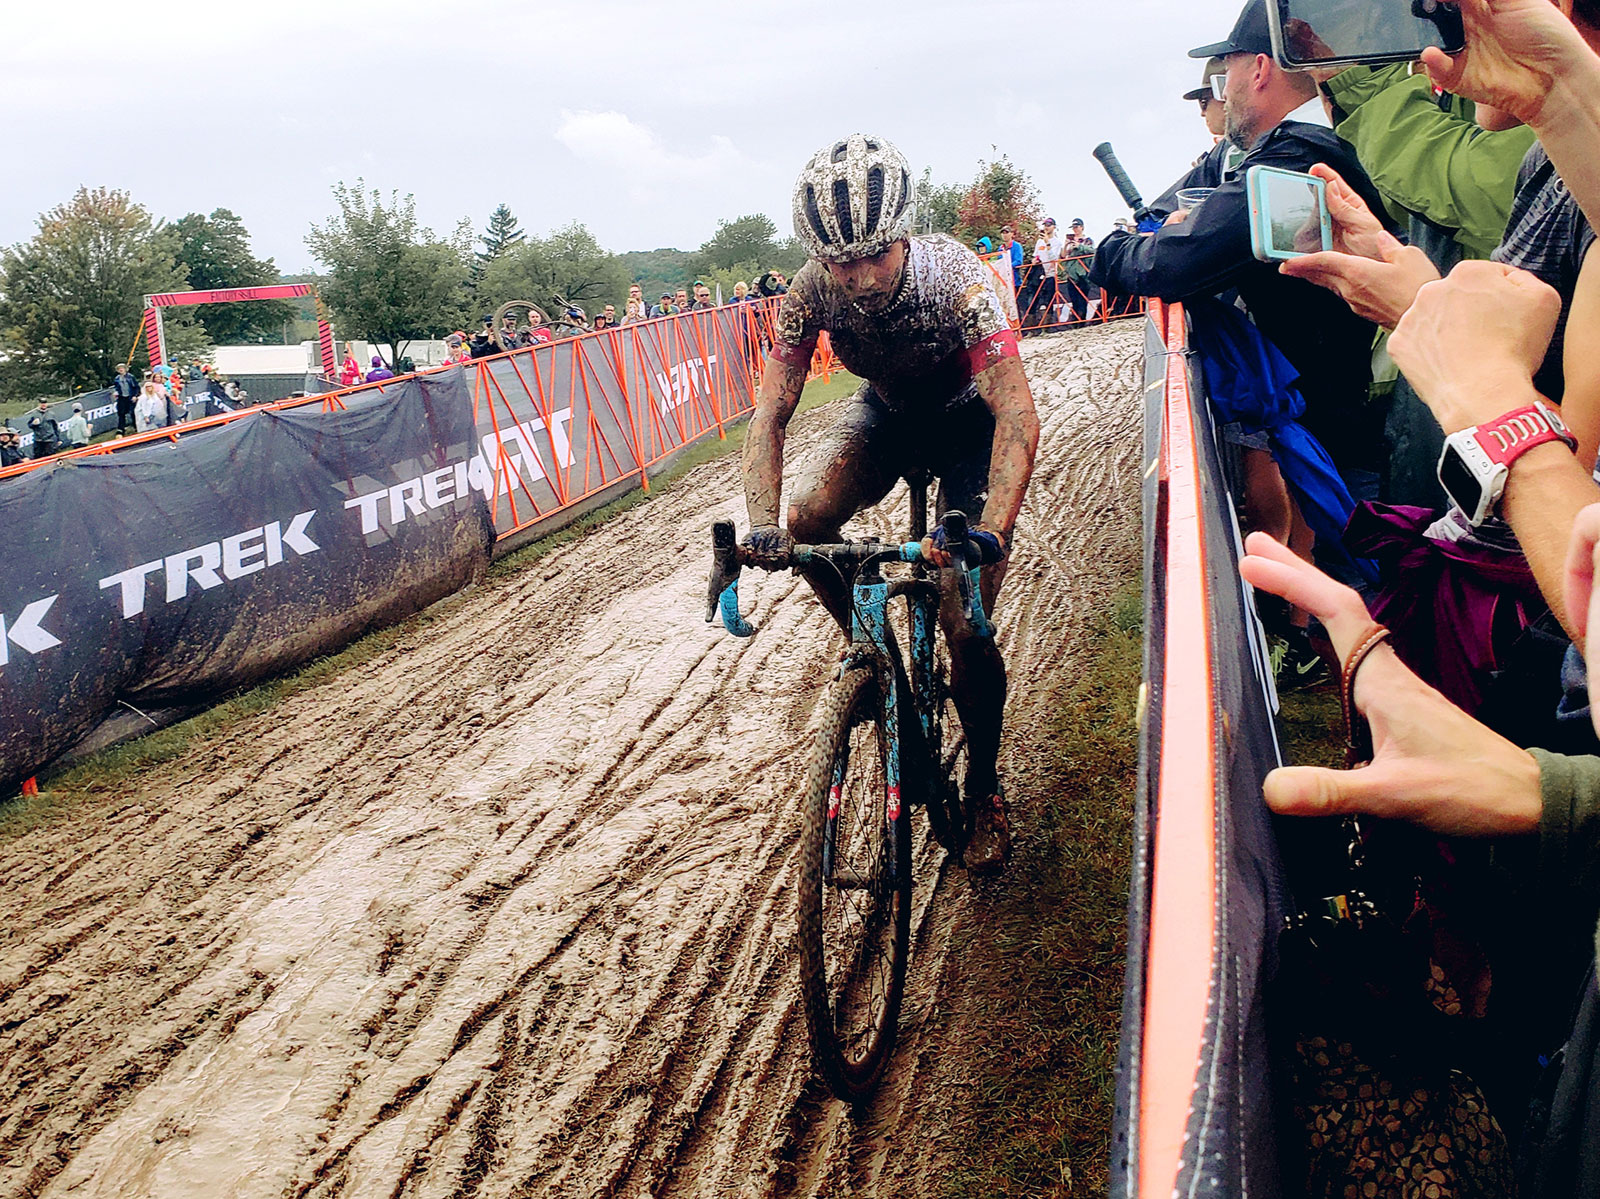 Trek Cyclocross World Cup brought the mudness to Waterloo